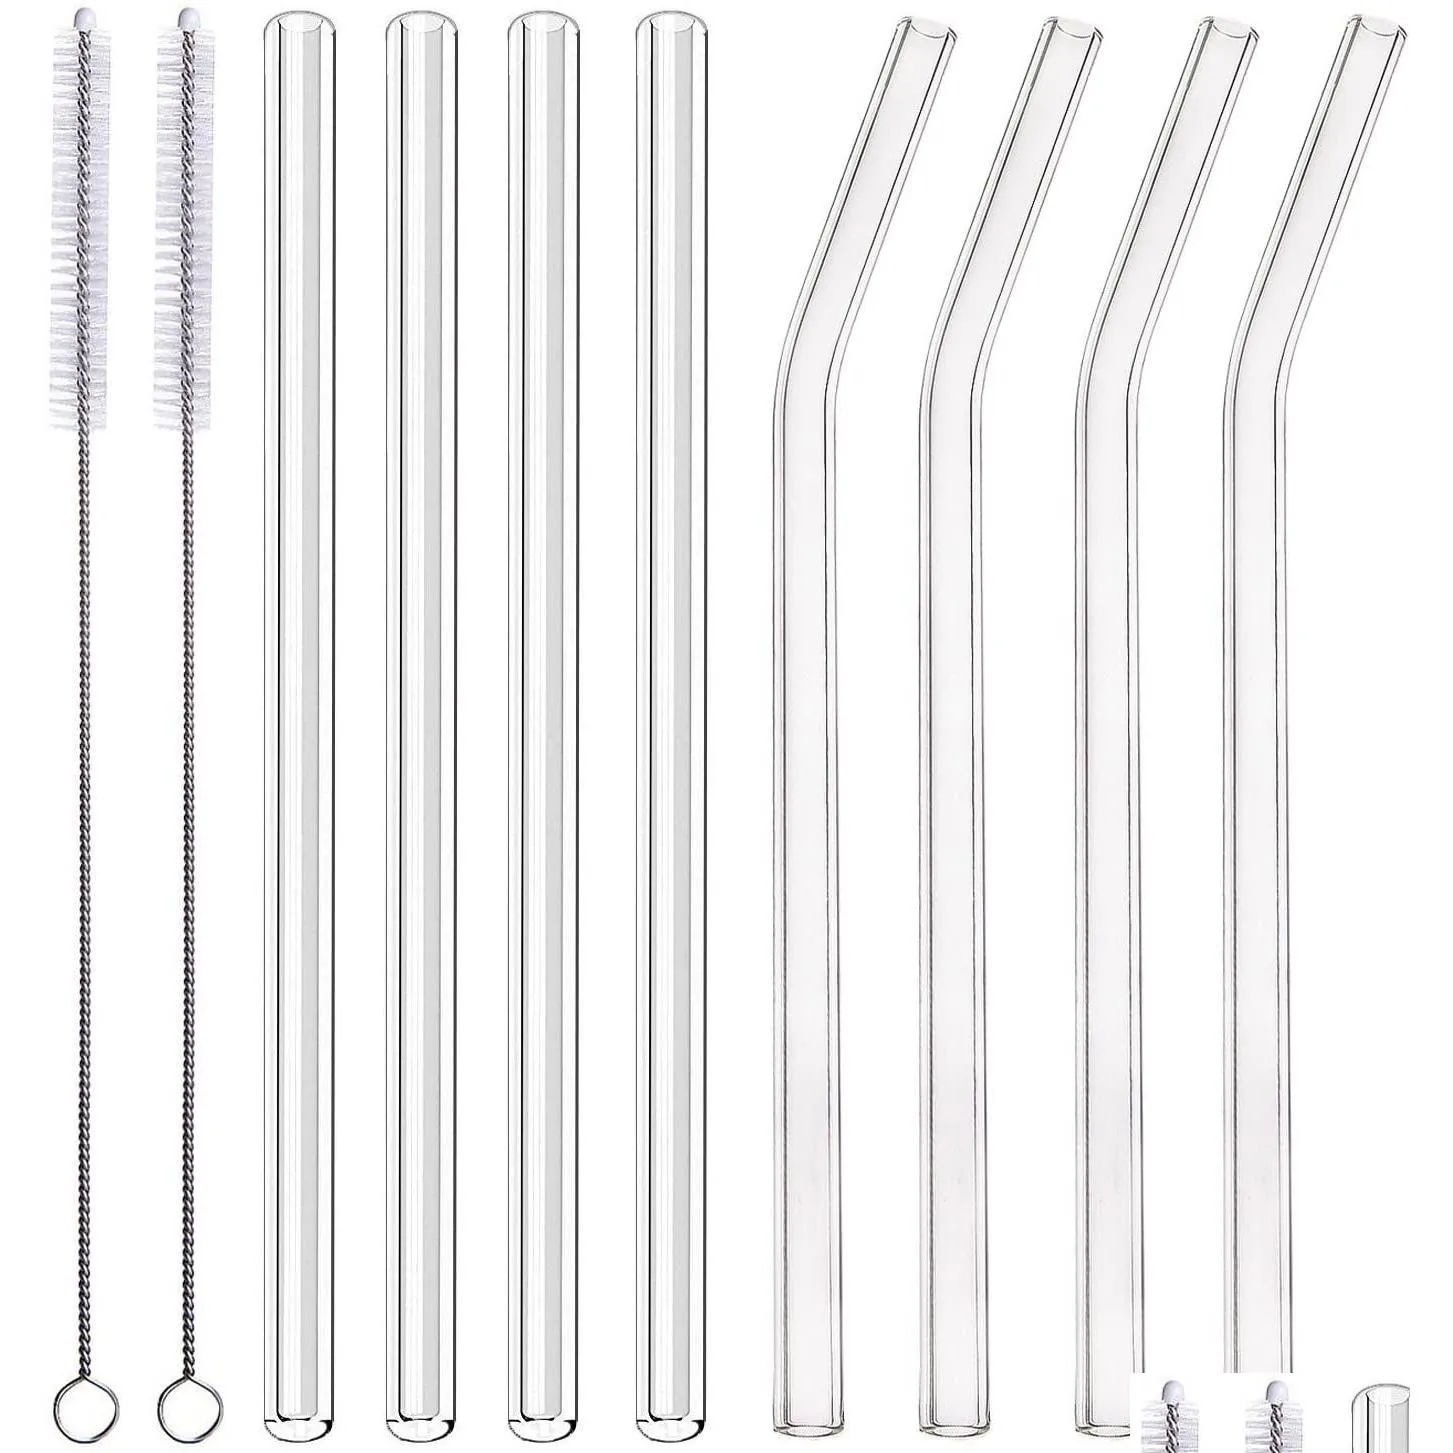 Dricker Straws 200x8mm Clear Glass STS For Smoothies Cocktails Hälsosam återanvändbar Eco Friendly Drinkware Accessory Drop Delivery Home G DH0MX